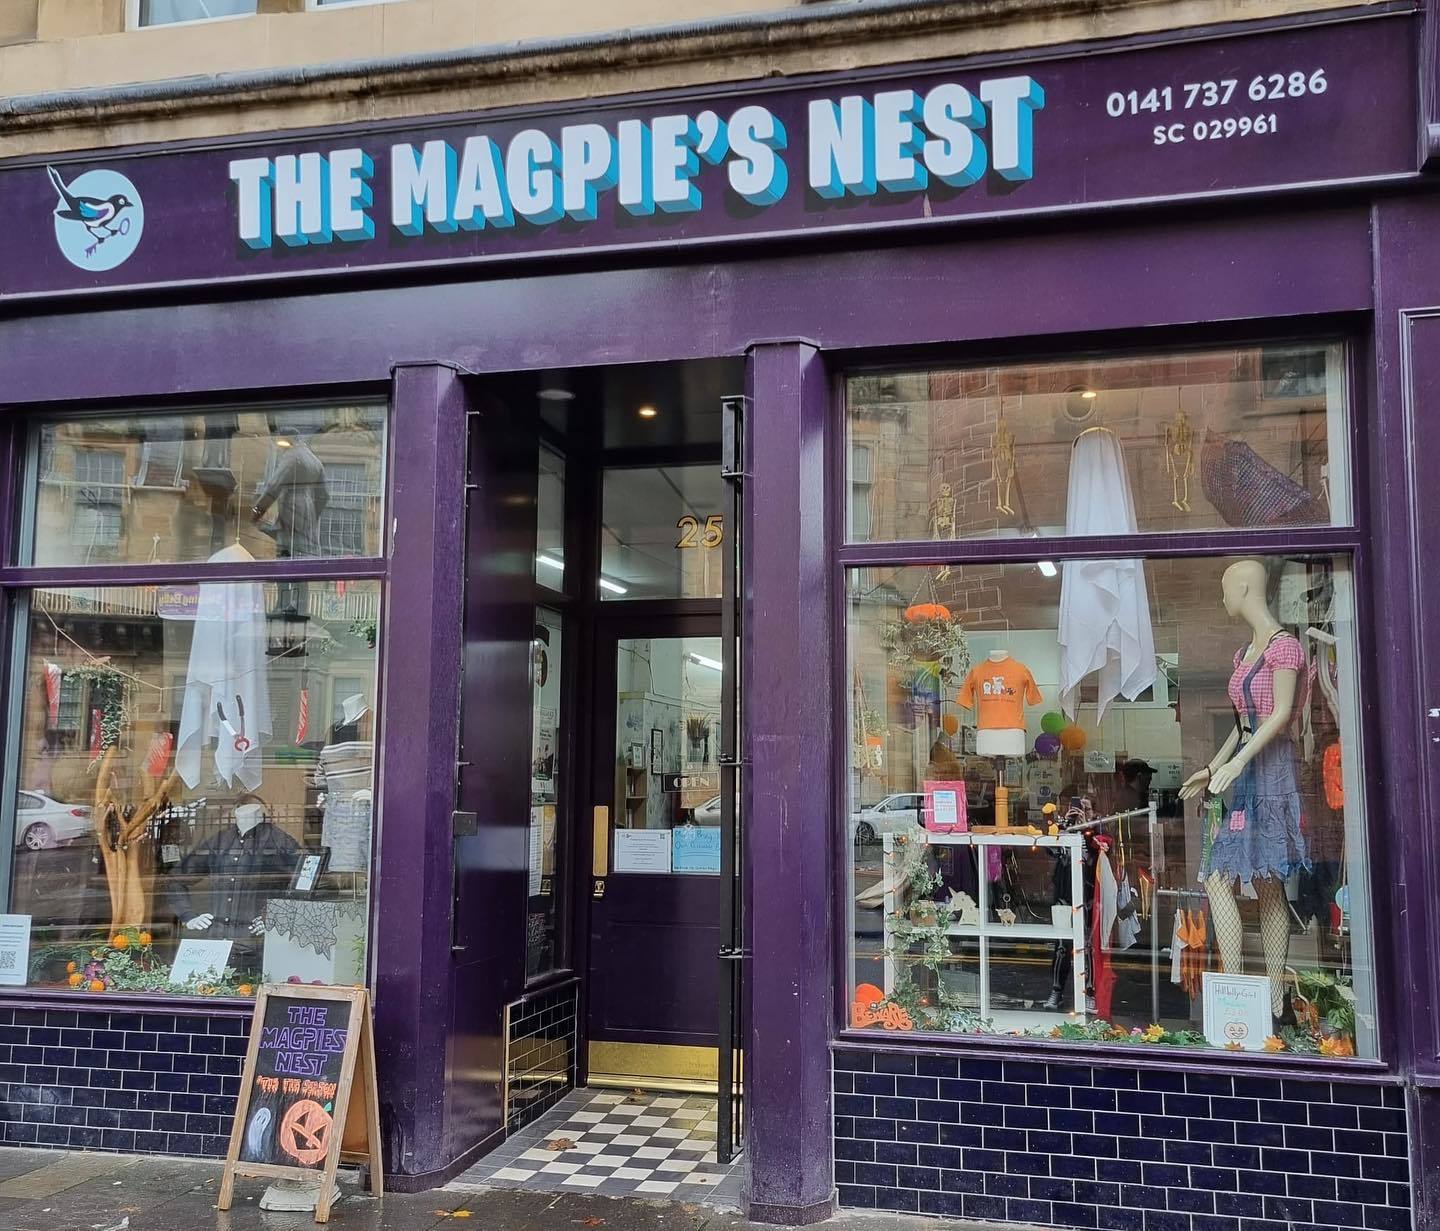 The Starter Pack Glasgow is supported by The Magpie's Nest, as well as donations.